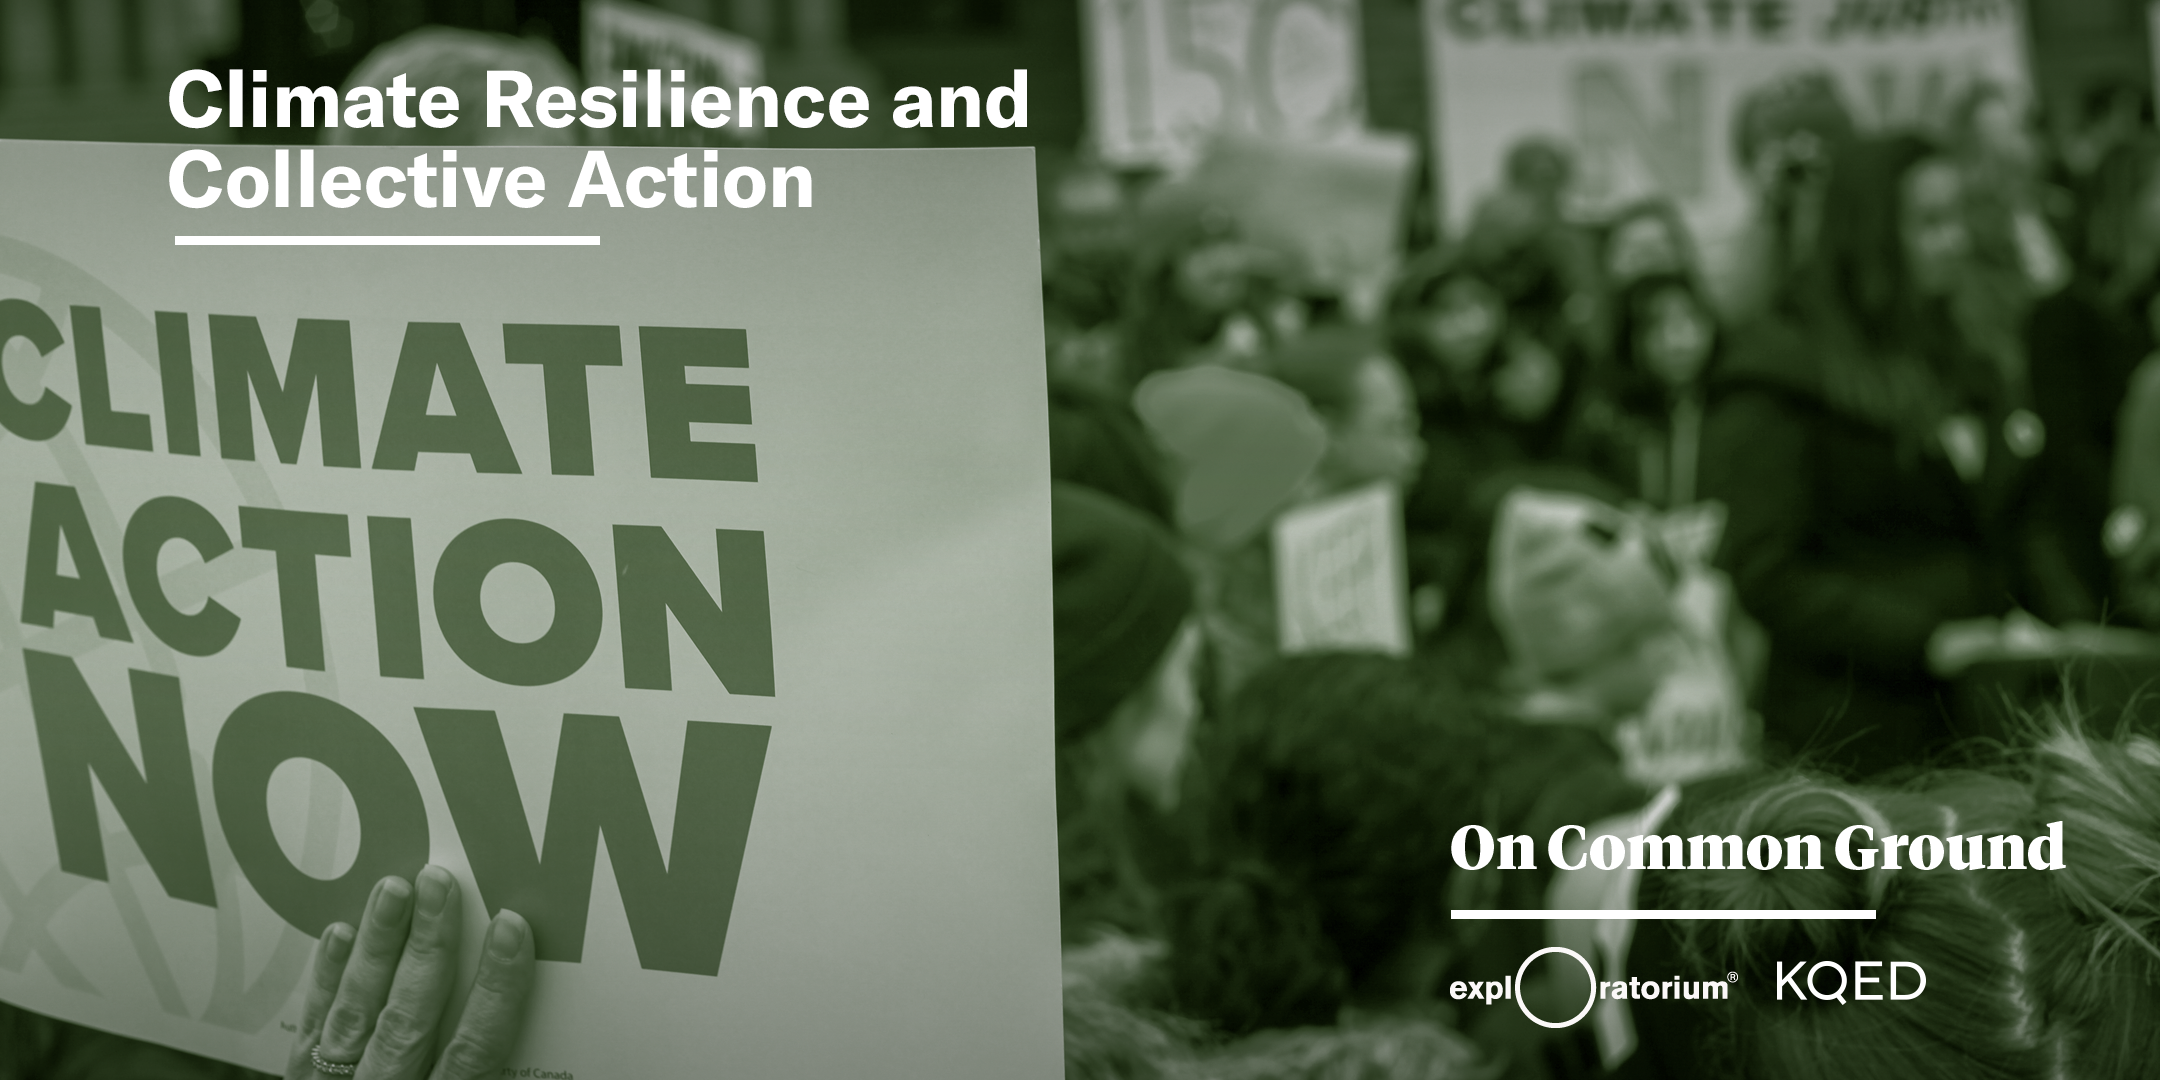 On Common Ground: Climate Resilience and Collective Action